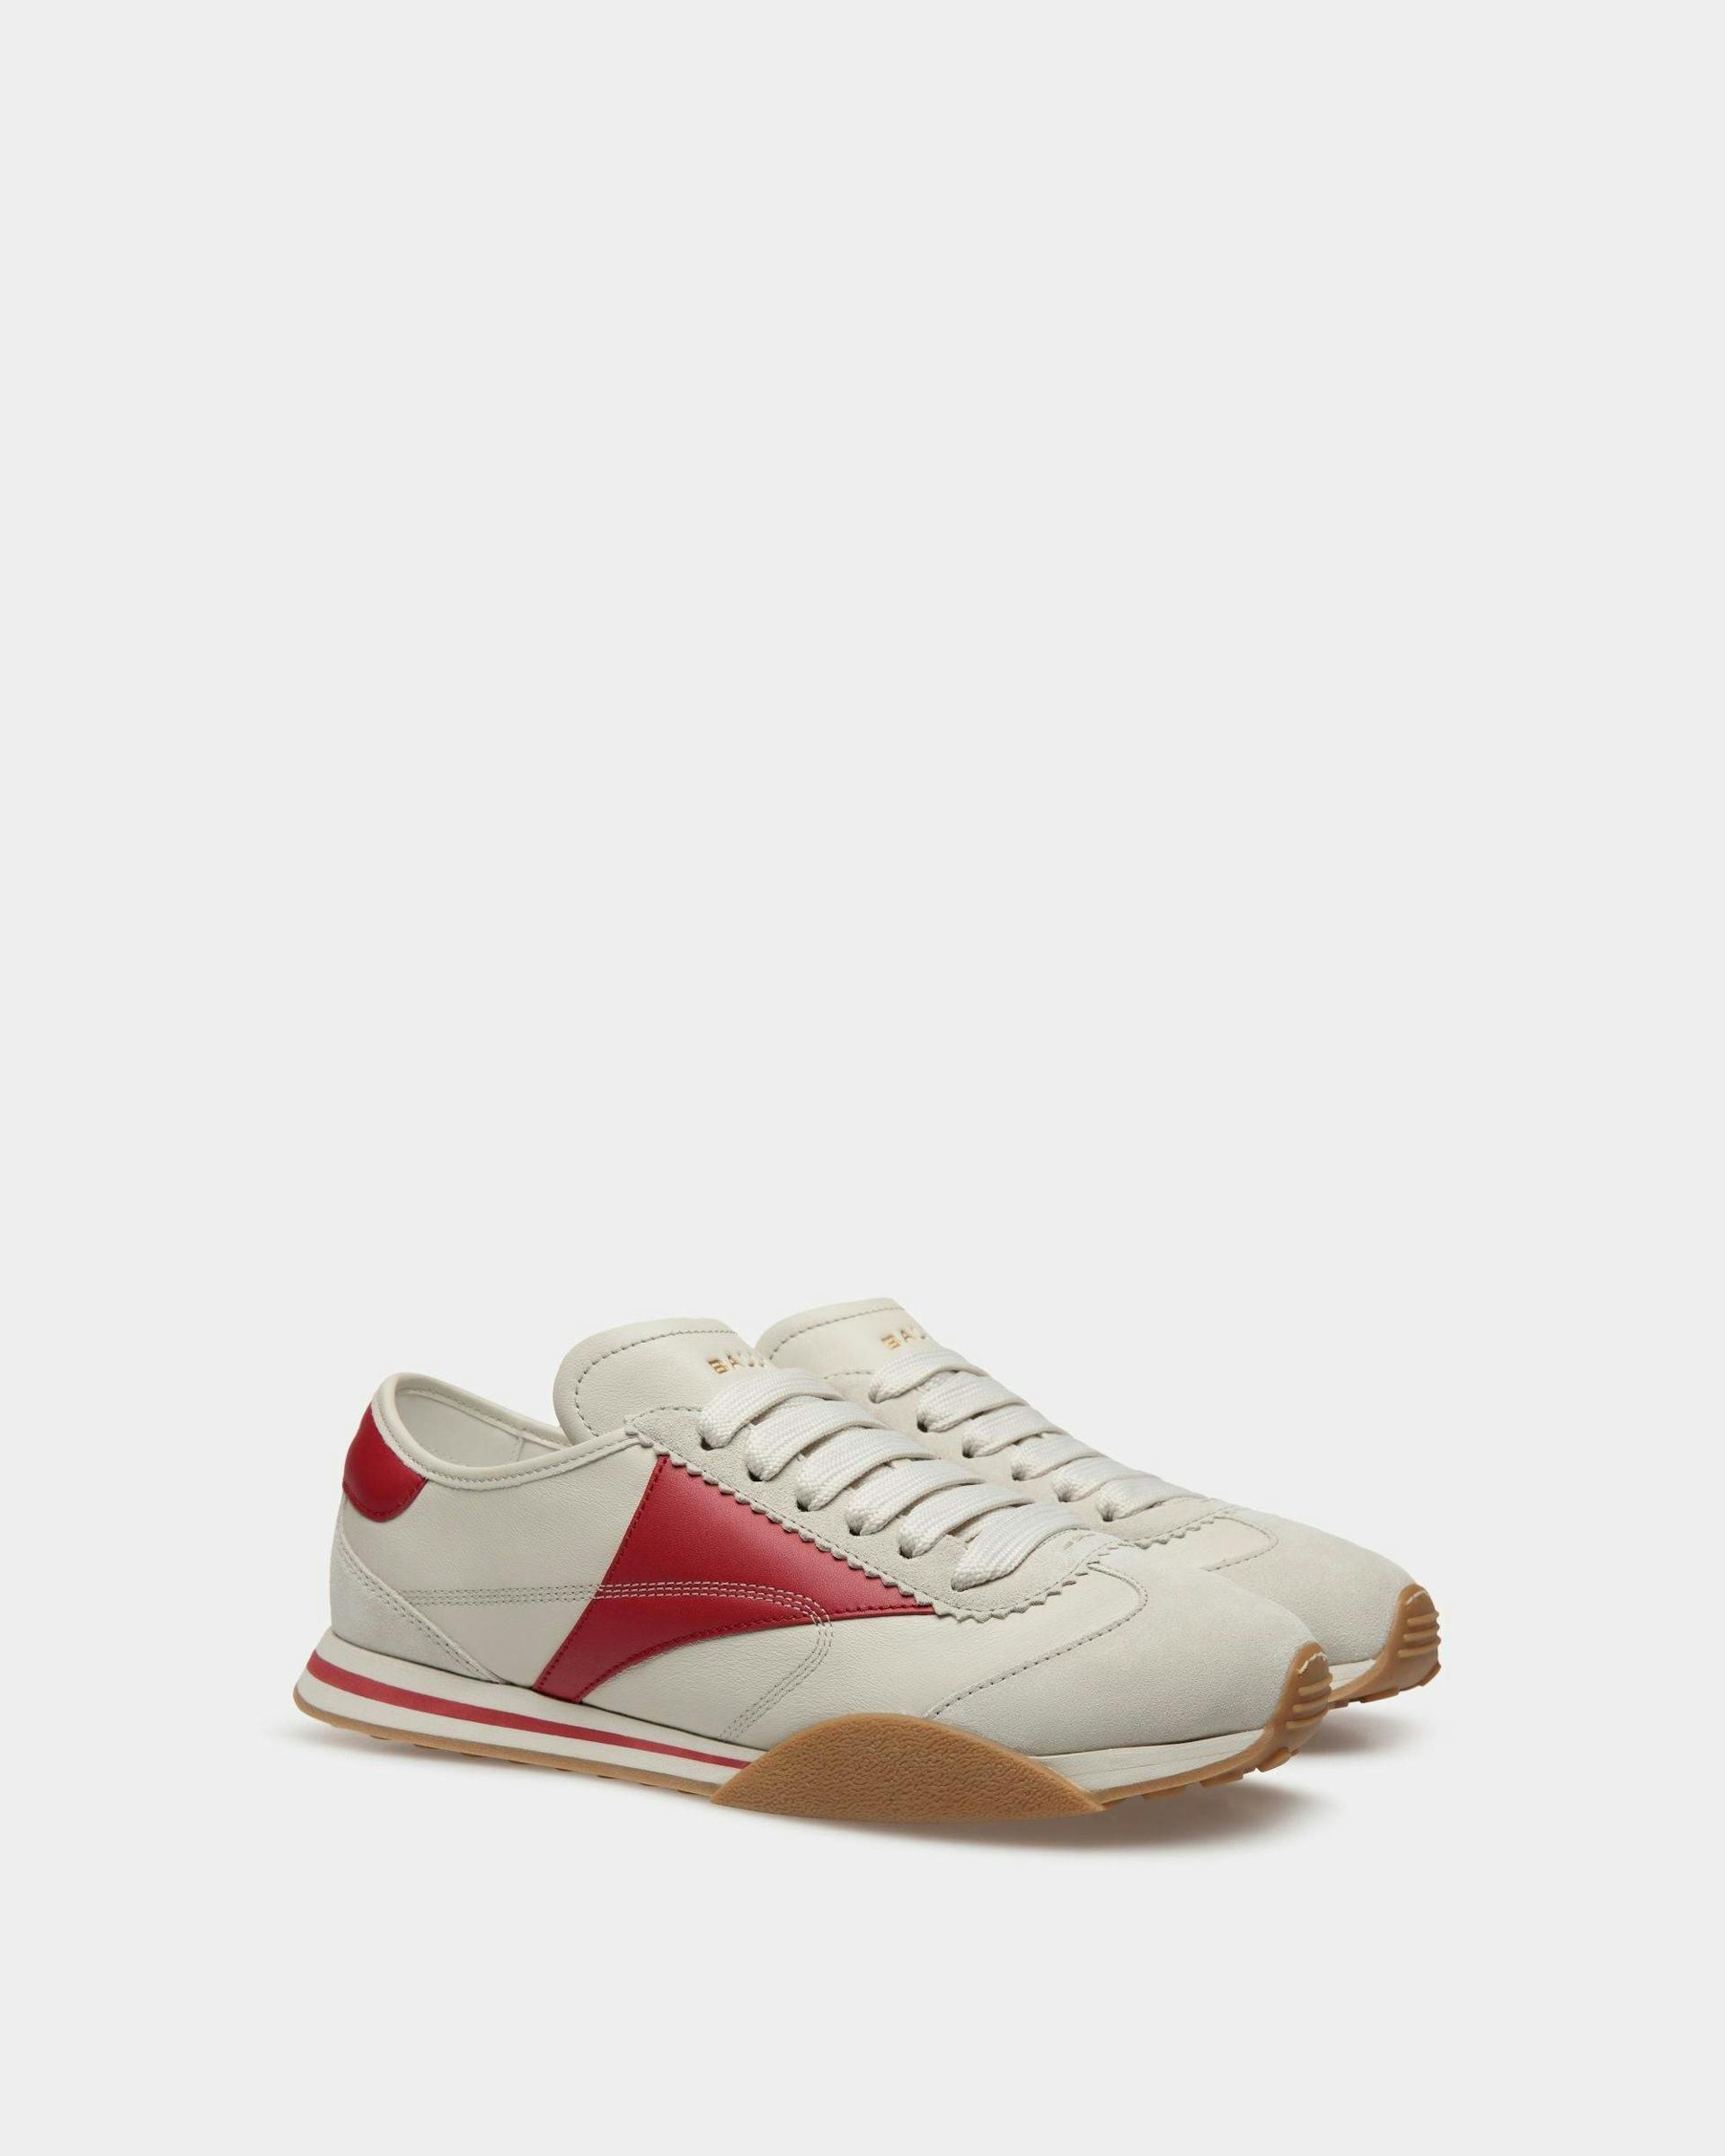 Sussex Sneakers In Dusty White And Deep Ruby Leather - Men's - Bally - 02